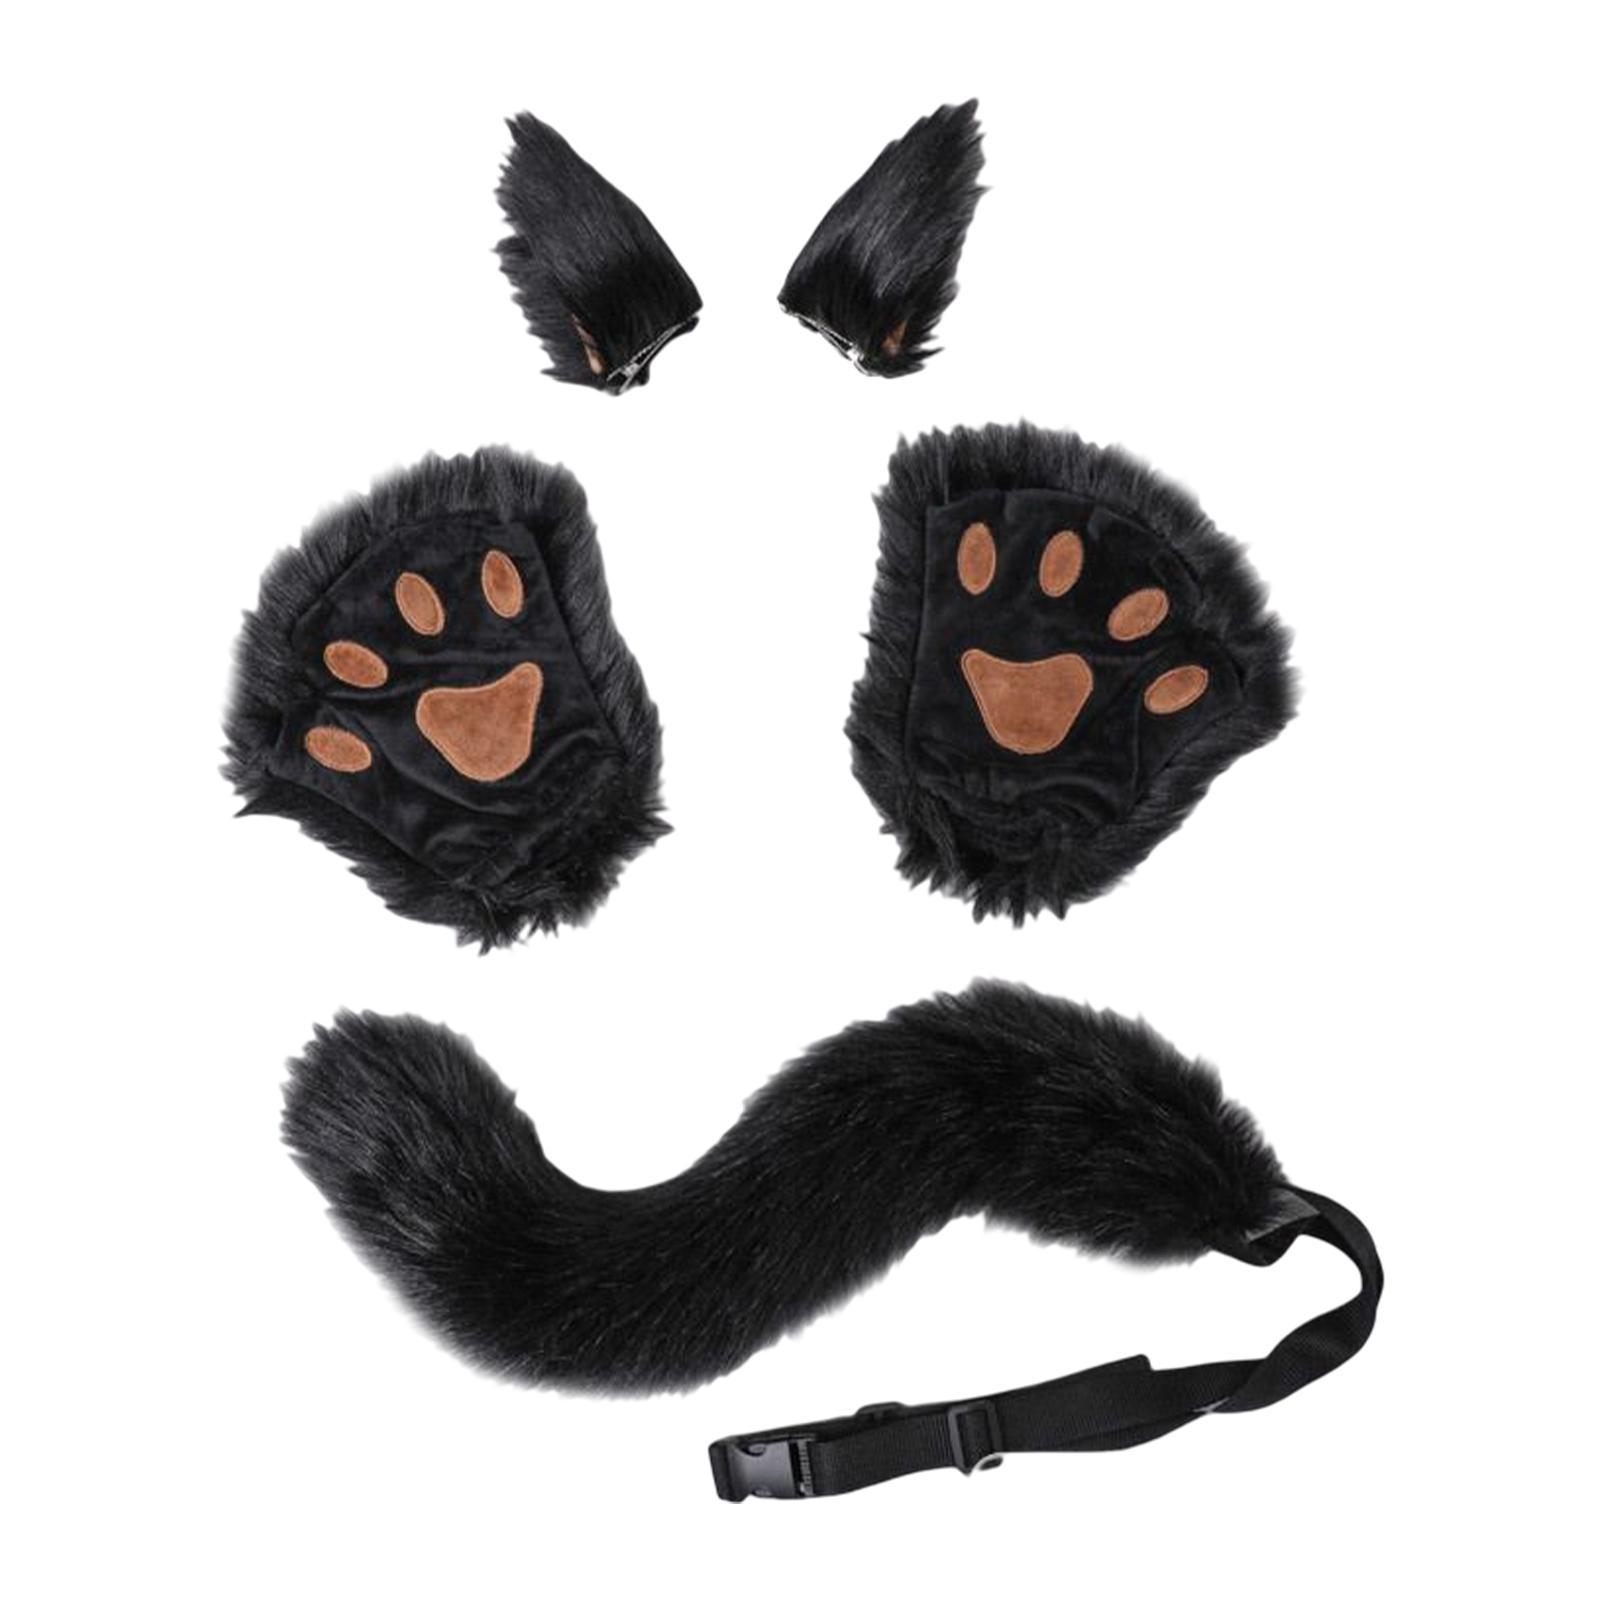 Costume Accessories Set Animal Ears Headband for Halloween Cosplay Fancy Dress Up Adult Kids Party Costume